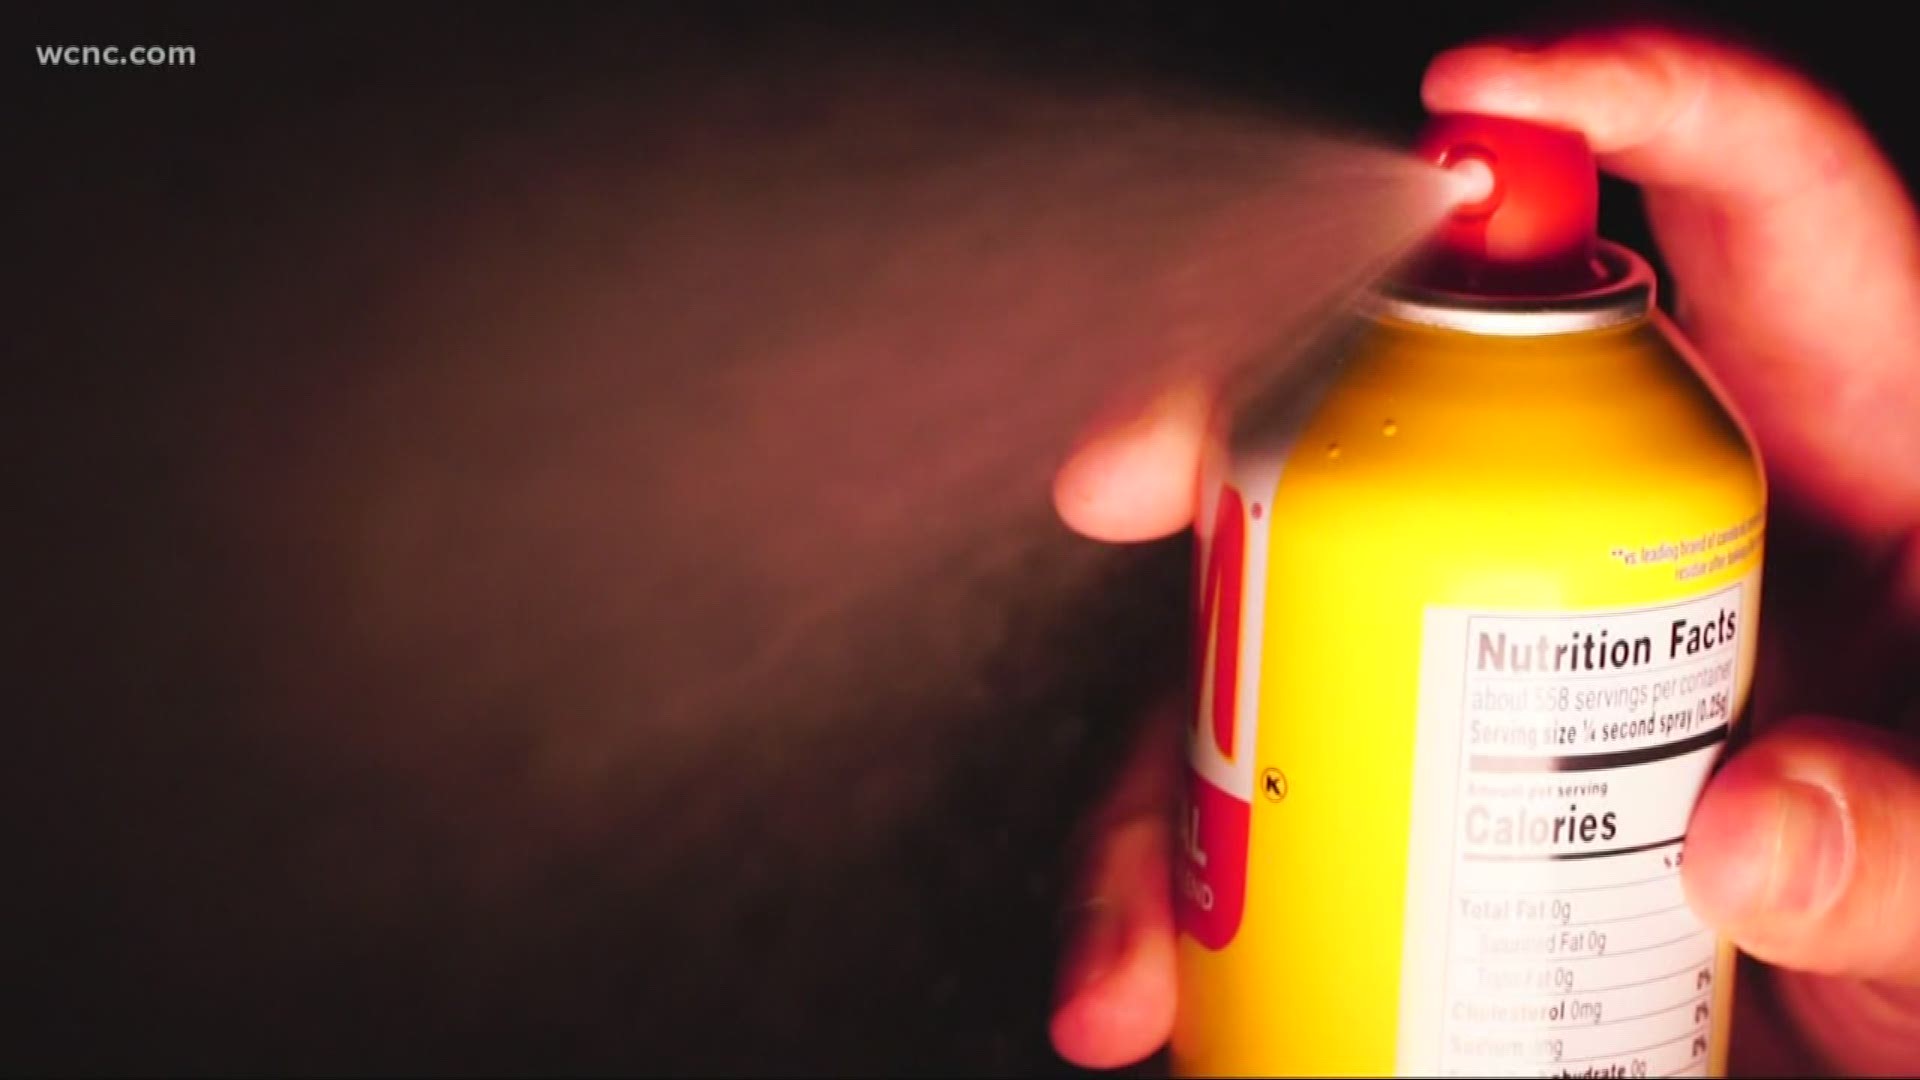 Several new lawsuits were filed against the food packaging company that makes cooking spray after dozens of people were badly burnt and injured when cans exploded.